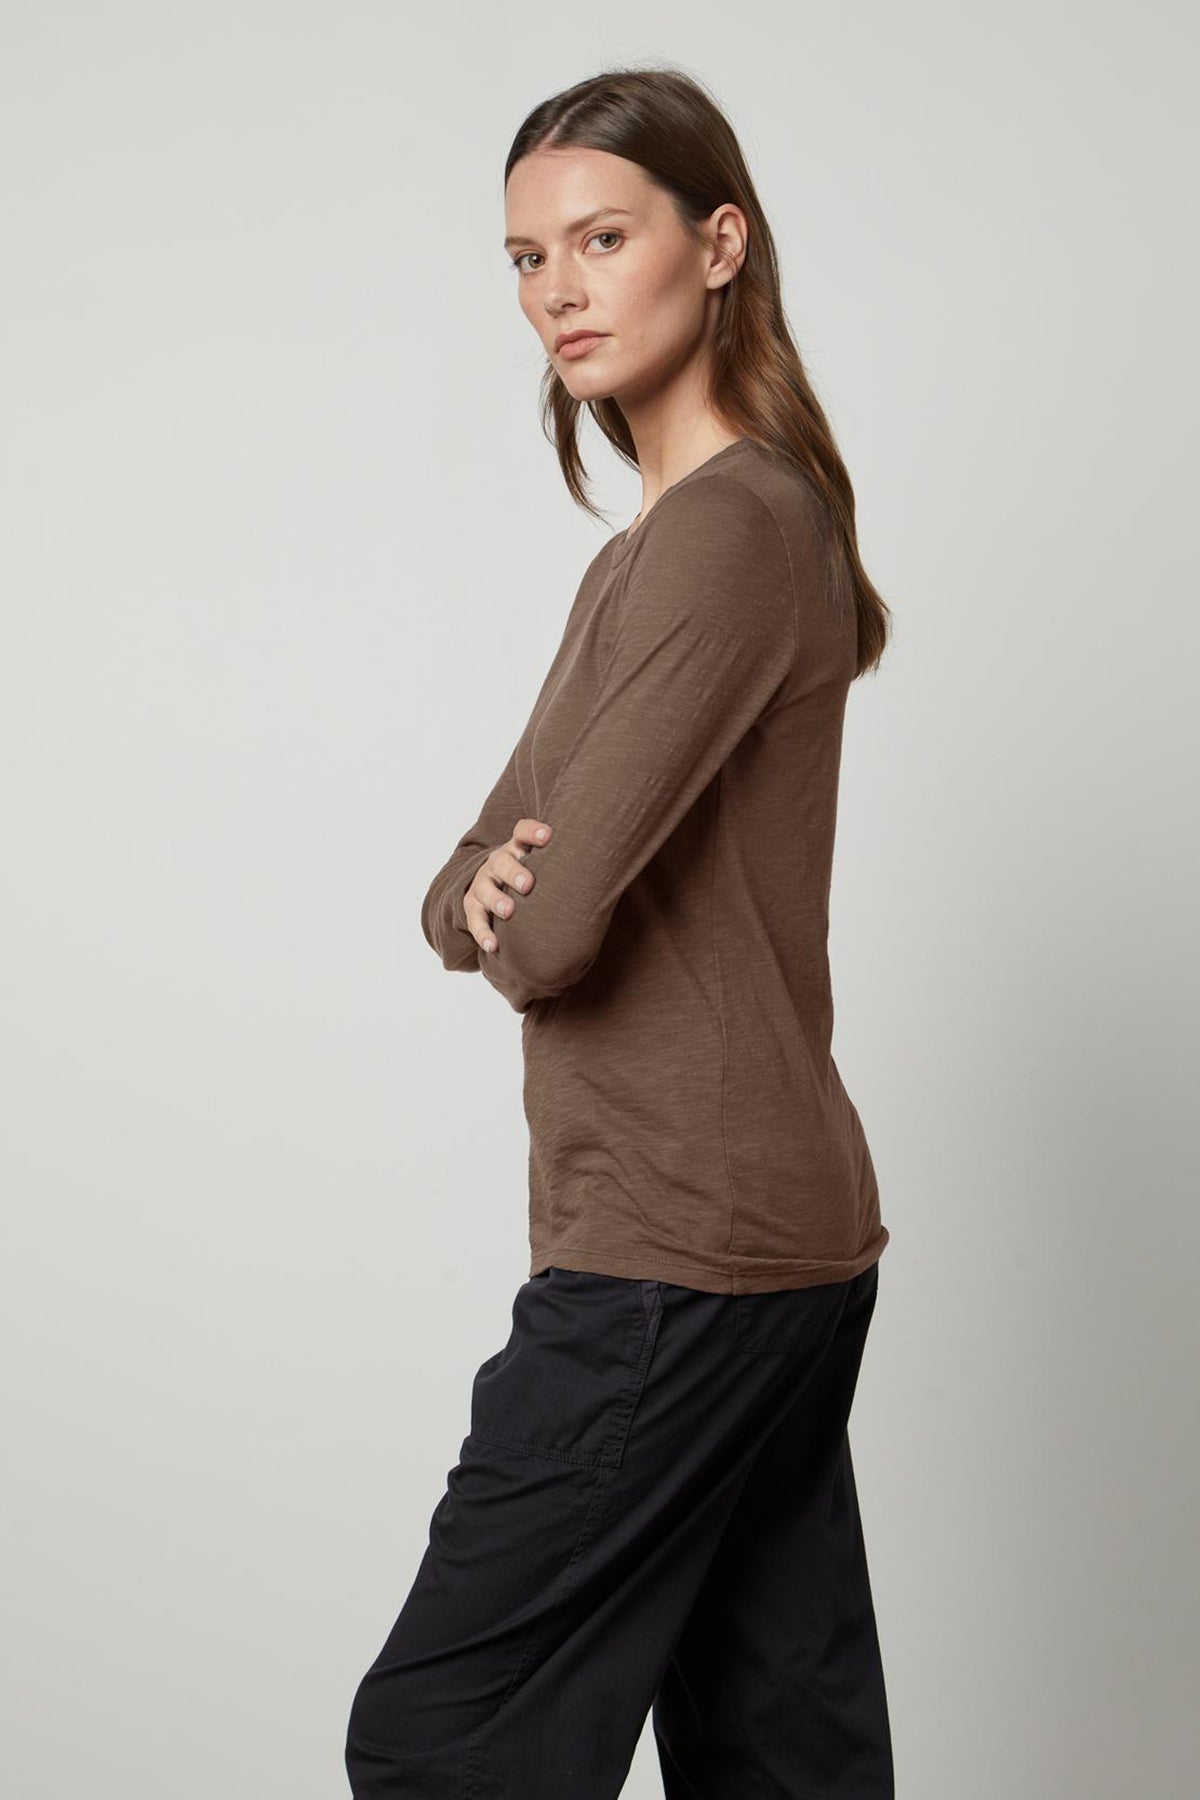   The model is wearing a Velvet by Graham & Spencer LIZZIE ORIGINAL SLUB LONG SLEEVE TEE made of cotton. 